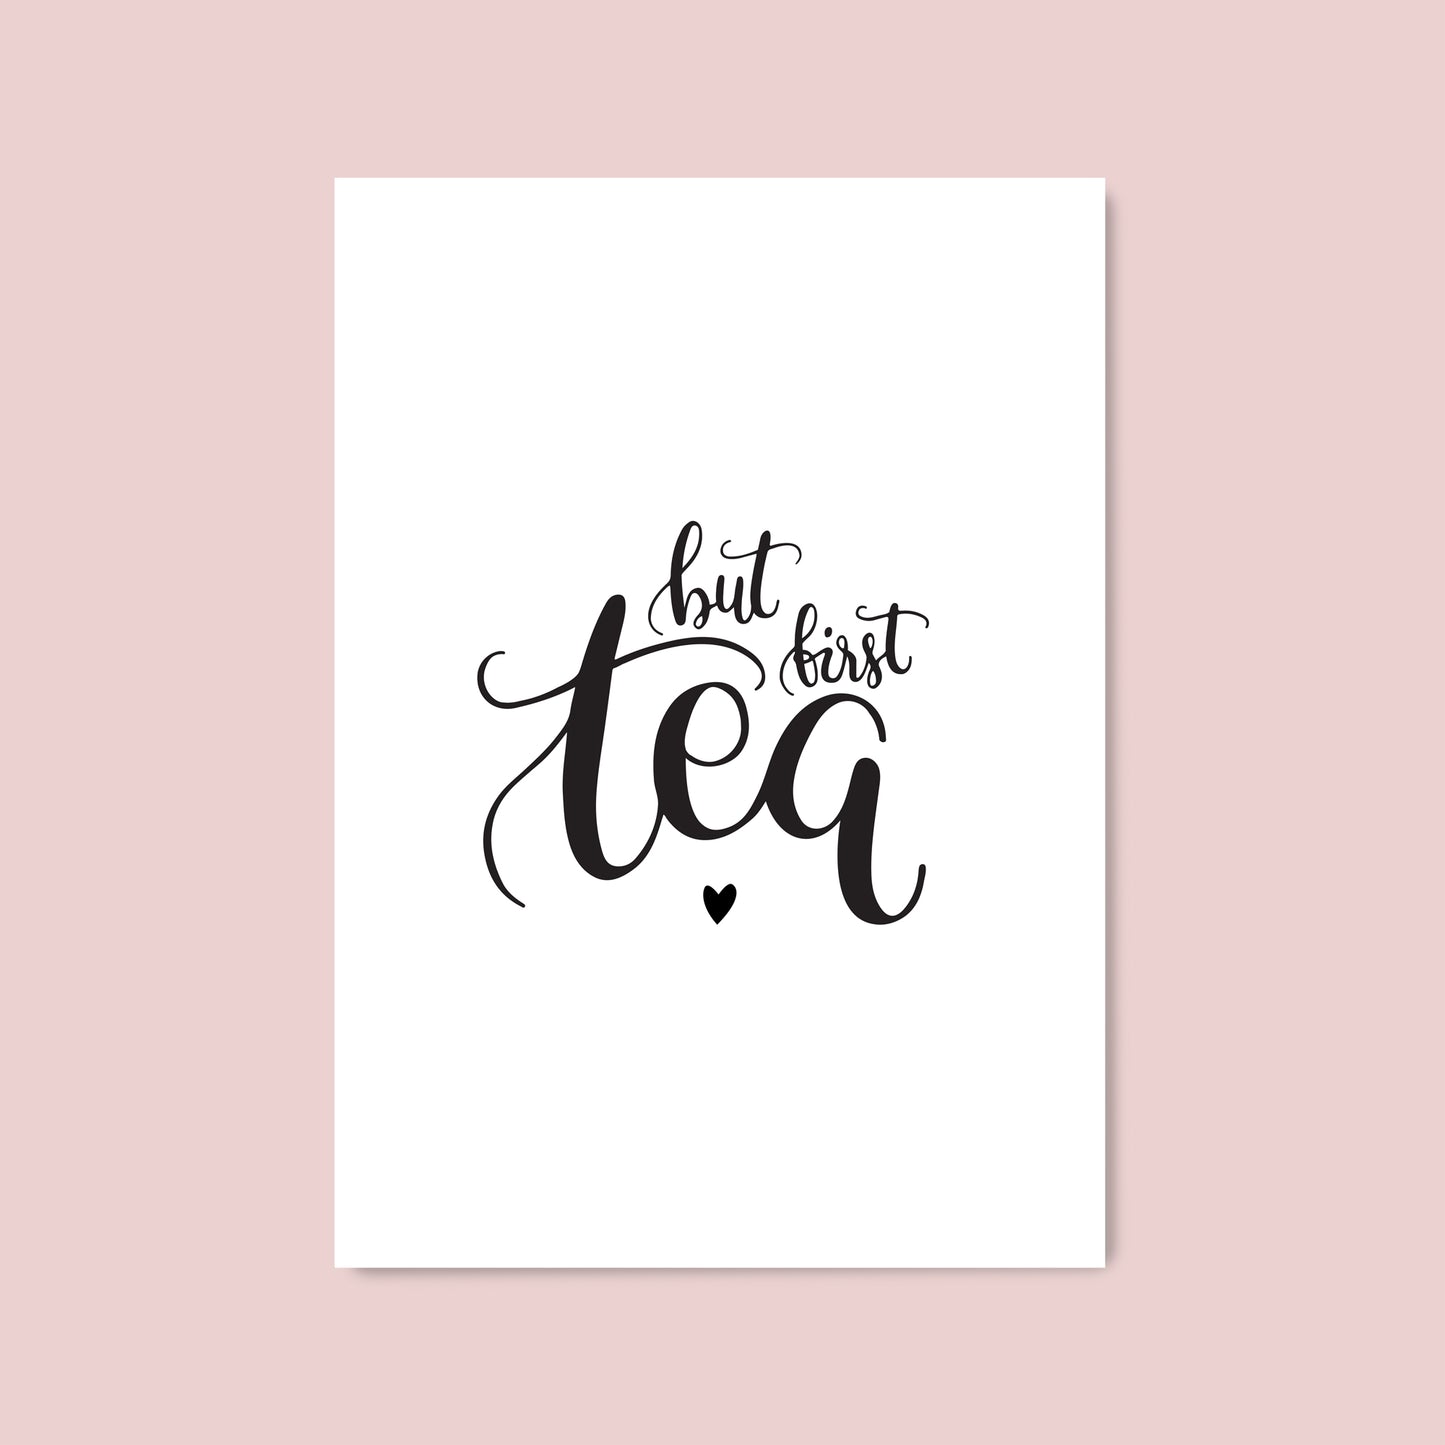 But first tea print for kitchen by Abbie Imagine